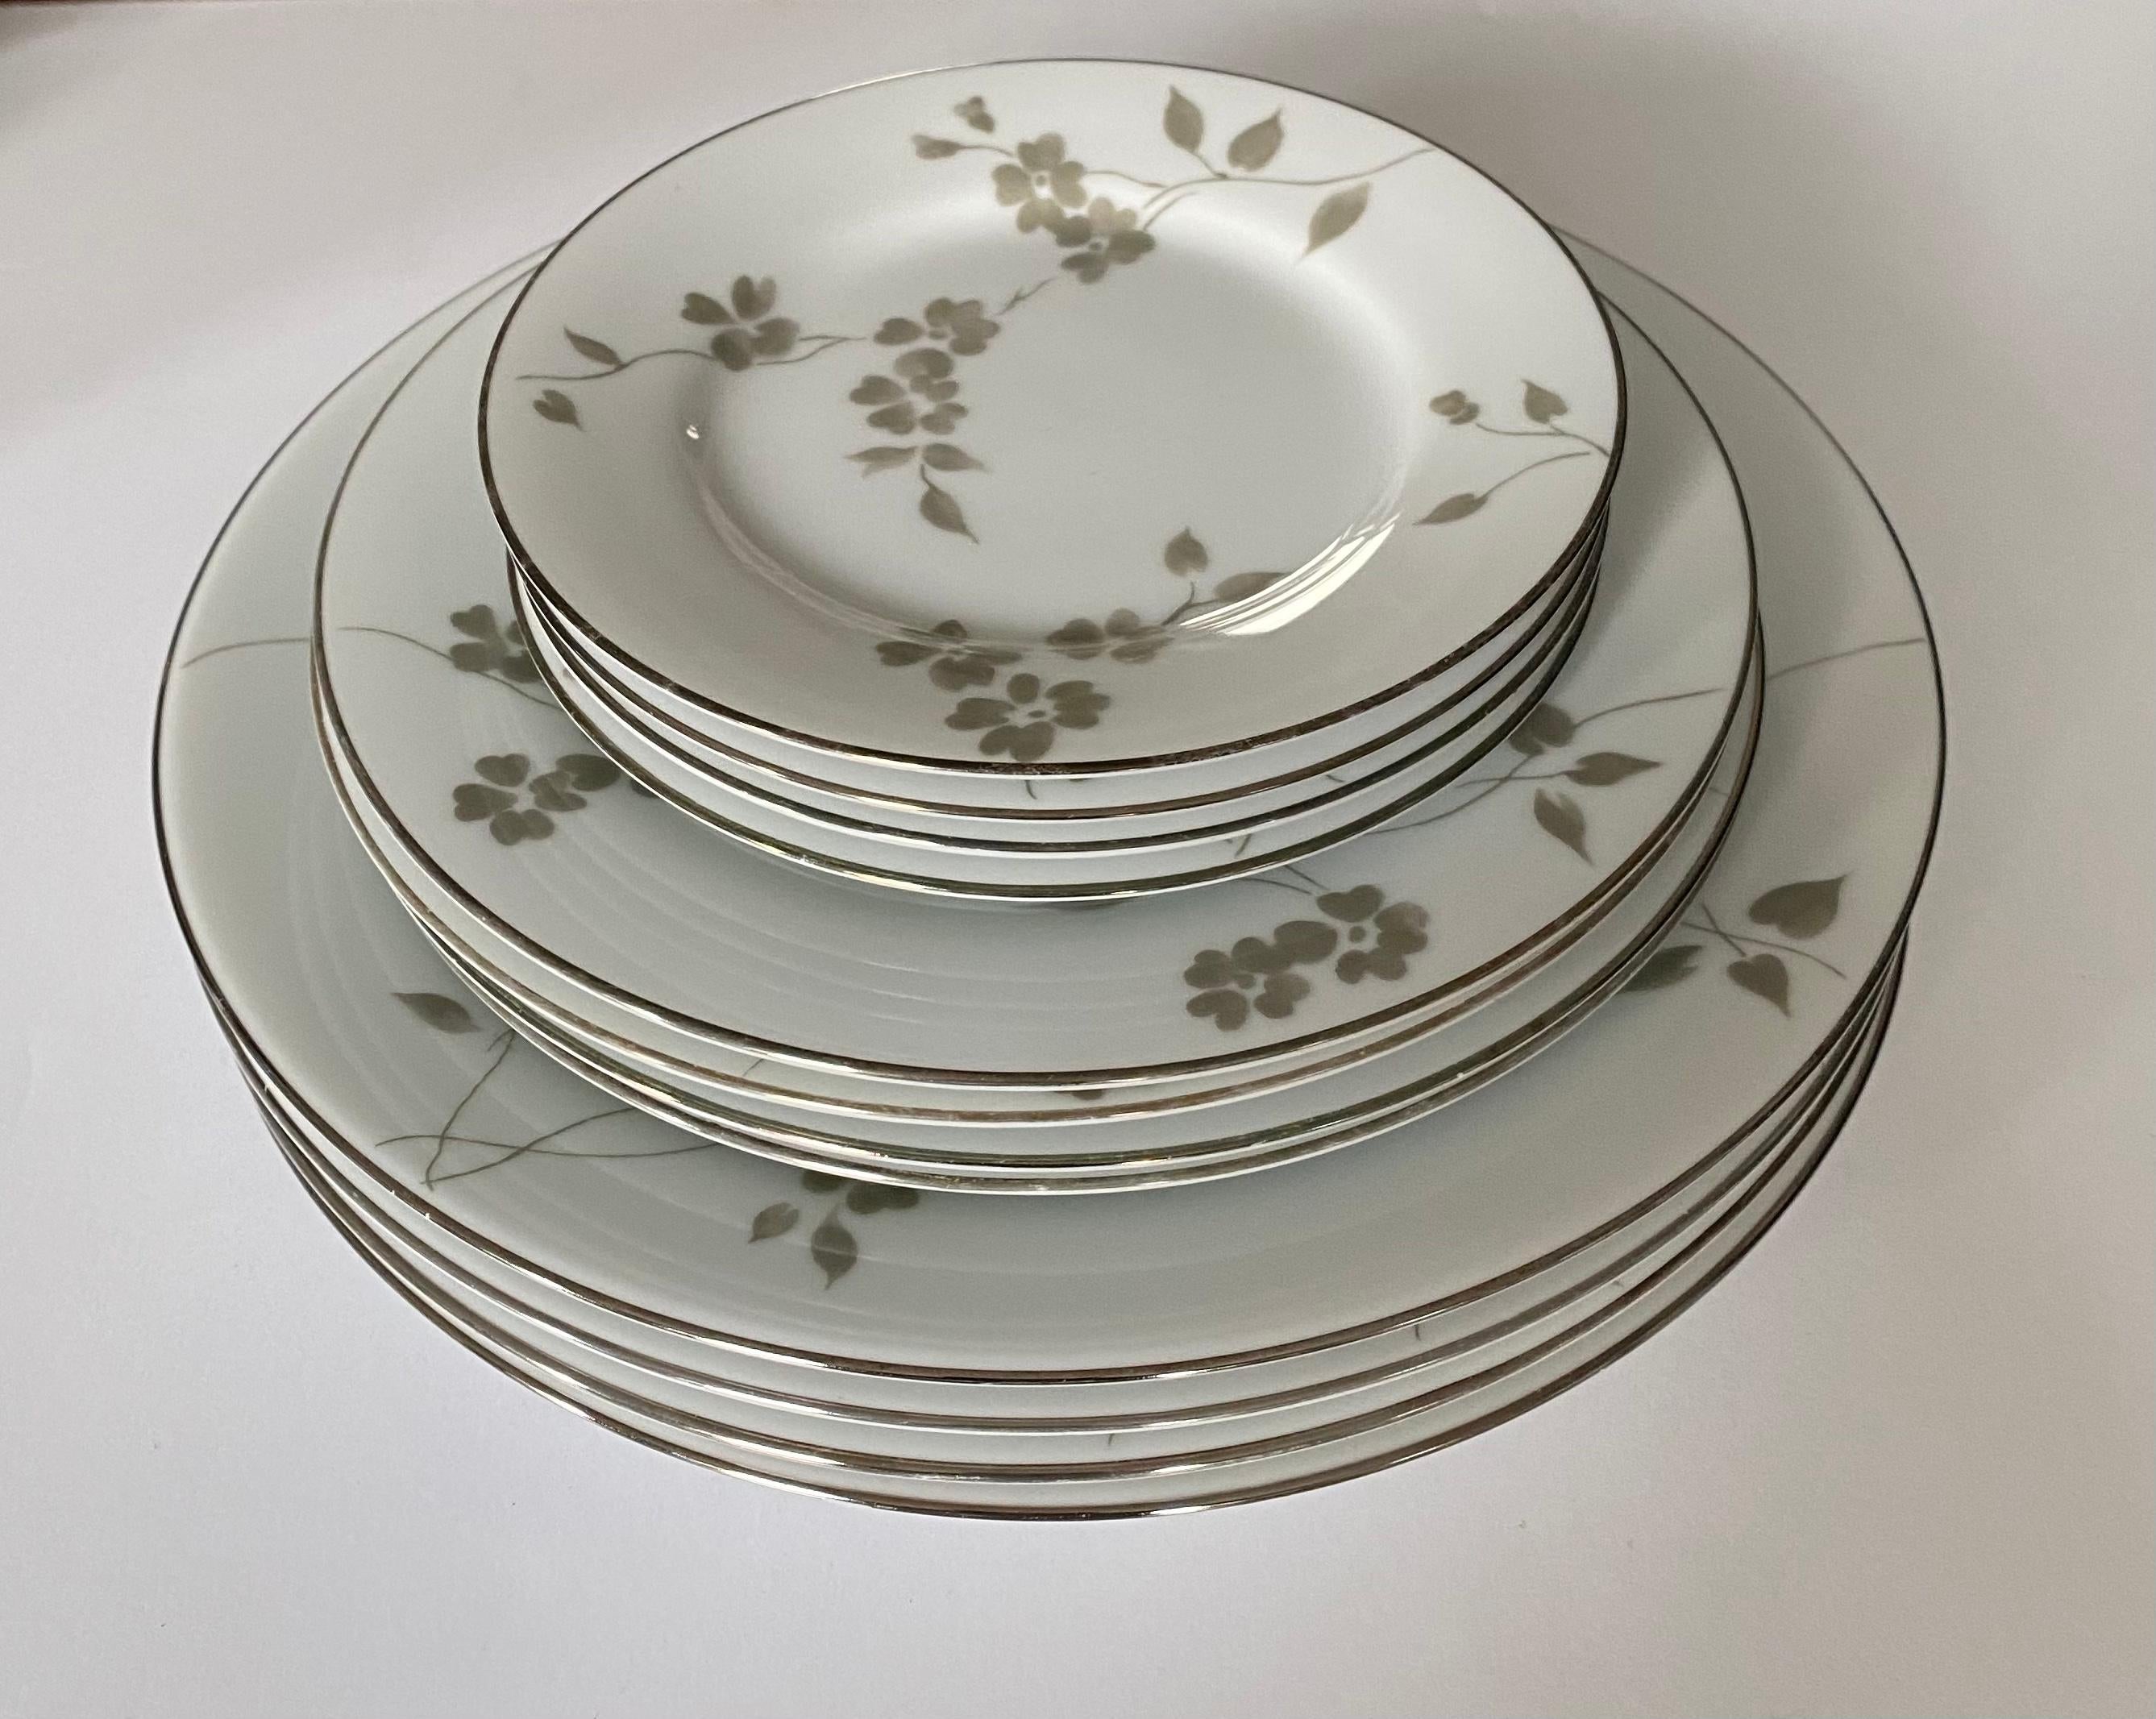 A set of four (4) dinnerware place settings in the Sophia pattern by Ralph Lauren Home. Signed, production period 2000-2002.

Features a delicate floral pattern in gray or green.

Includes 4 place settings. A total of 20 pieces. Each setting